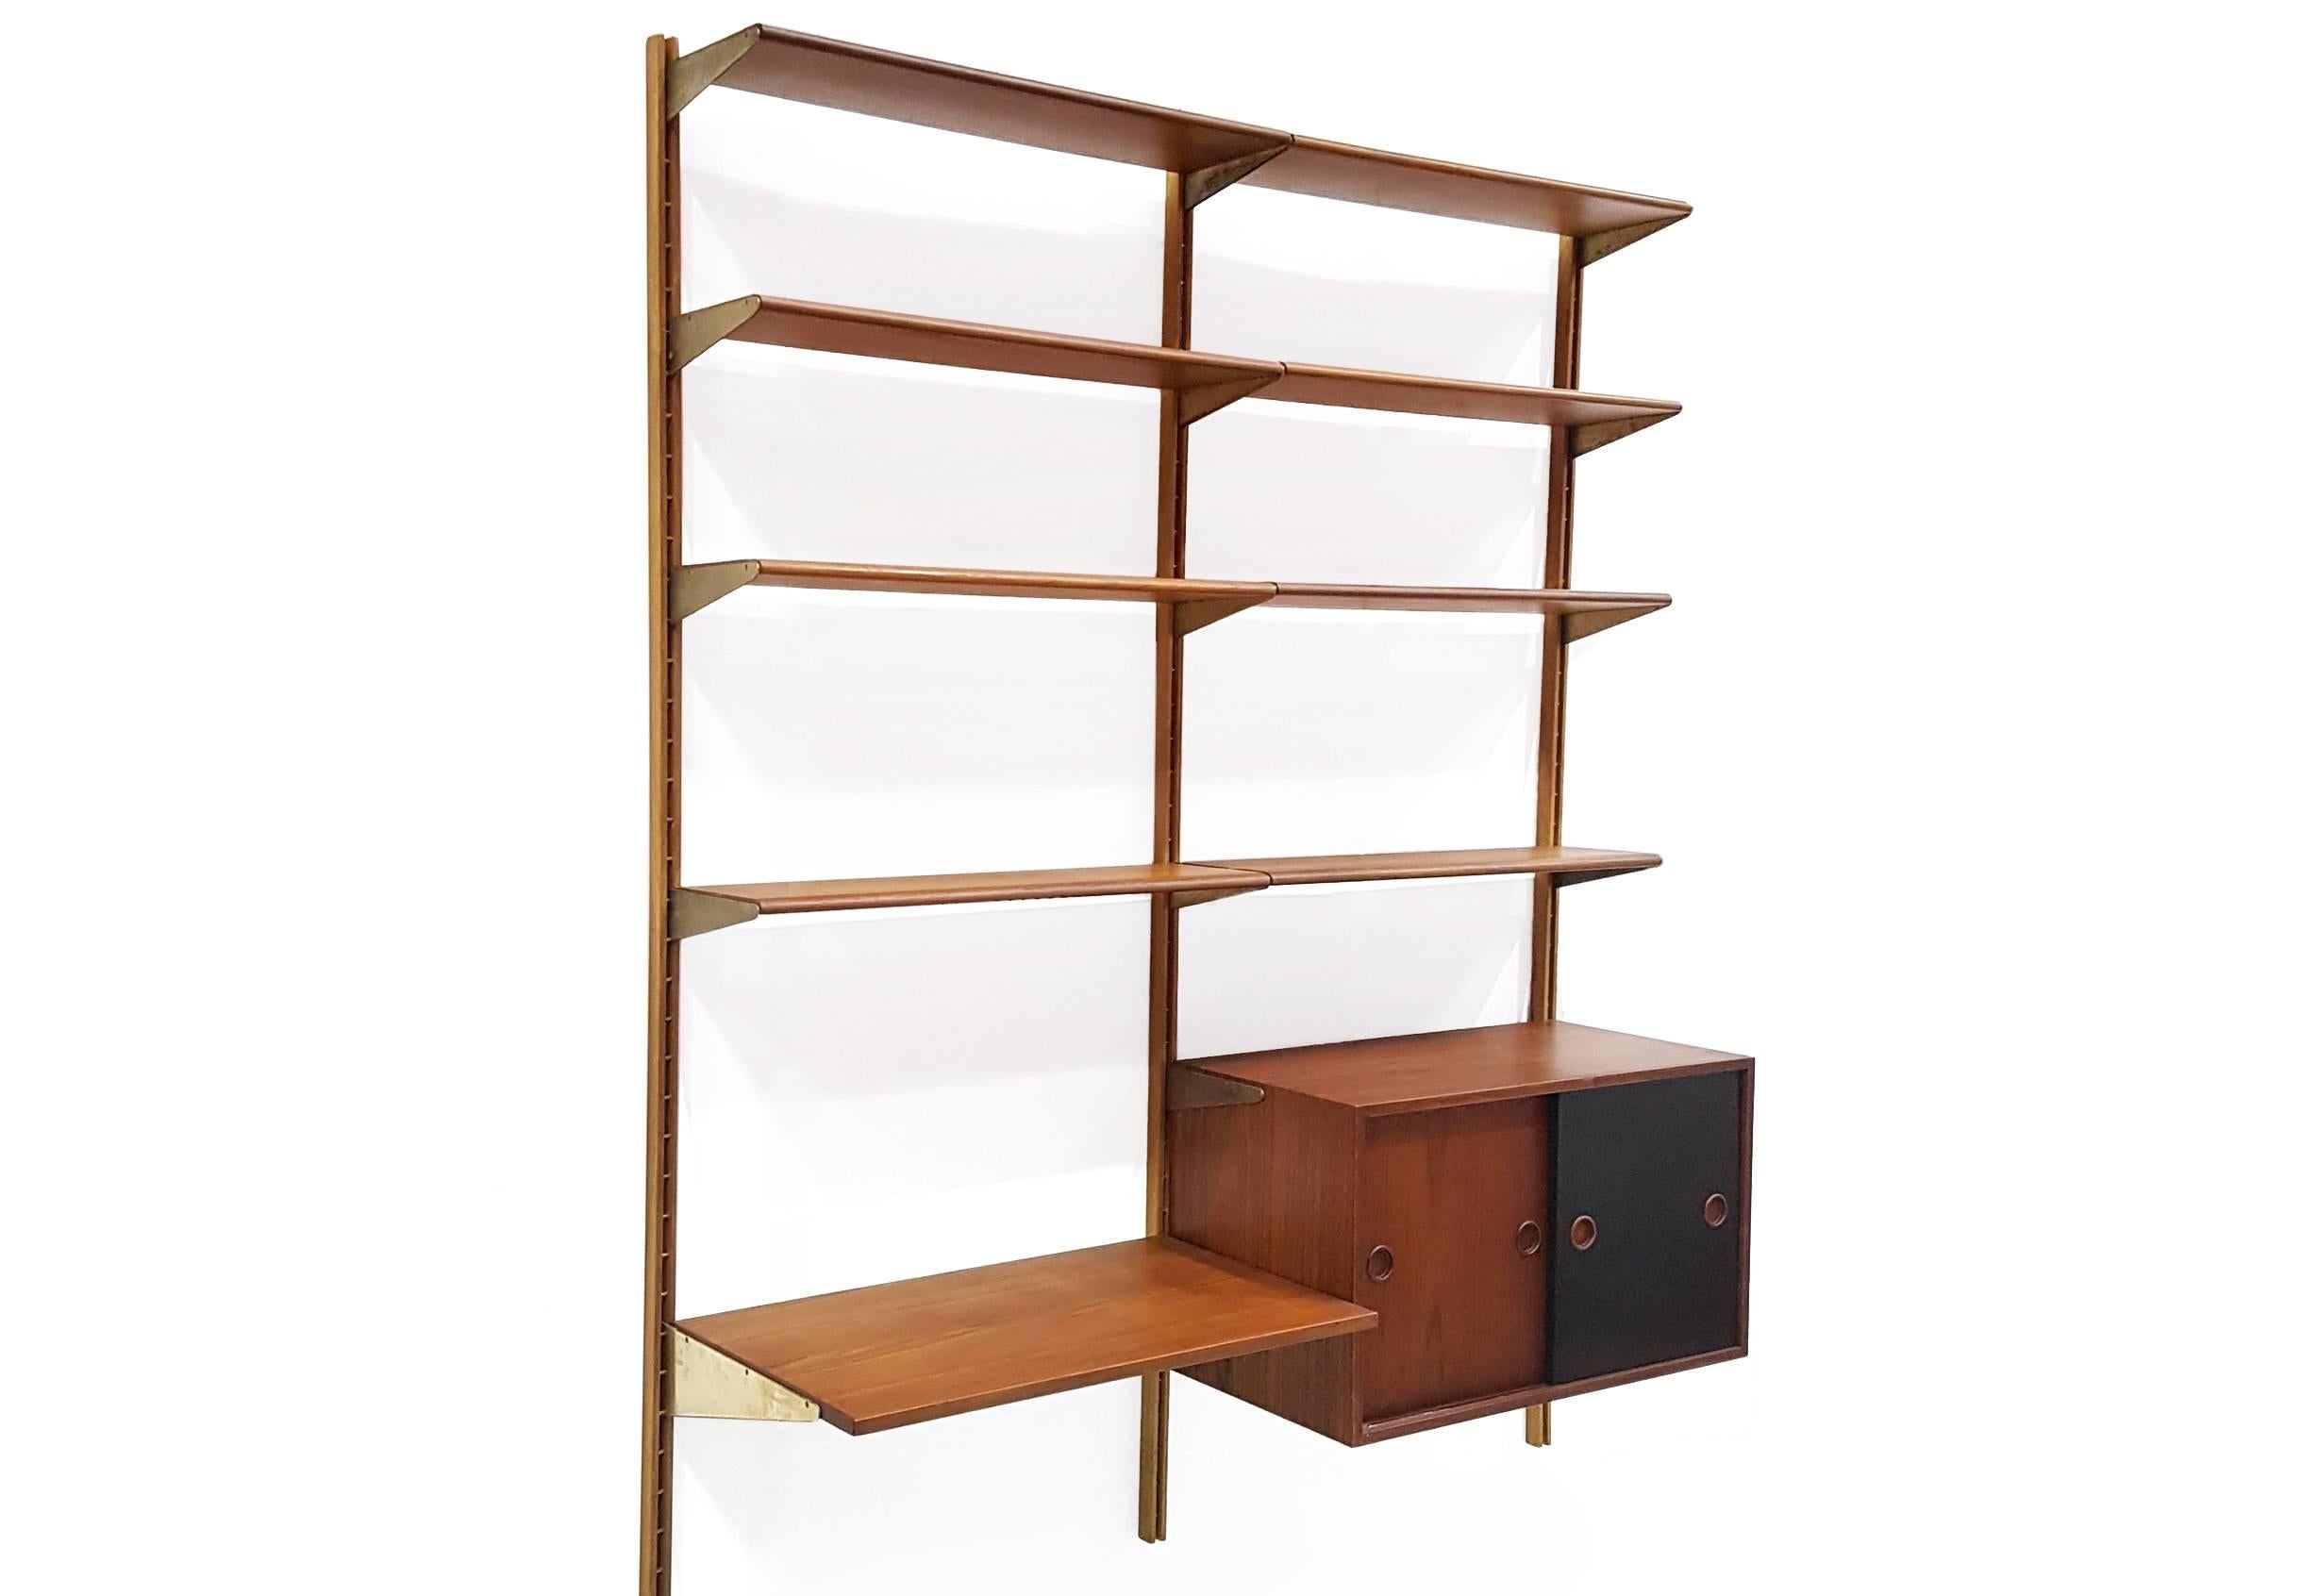 Beautiful teak wooden wall unit designed by Finn Juhl and produced by Bovirke Denmark, in the 1950.
This wall unit offers a cabinet with two sliding doors, one deep shelf which can be used as a desk (45 cm deep) and eight shelves.
The shelves are